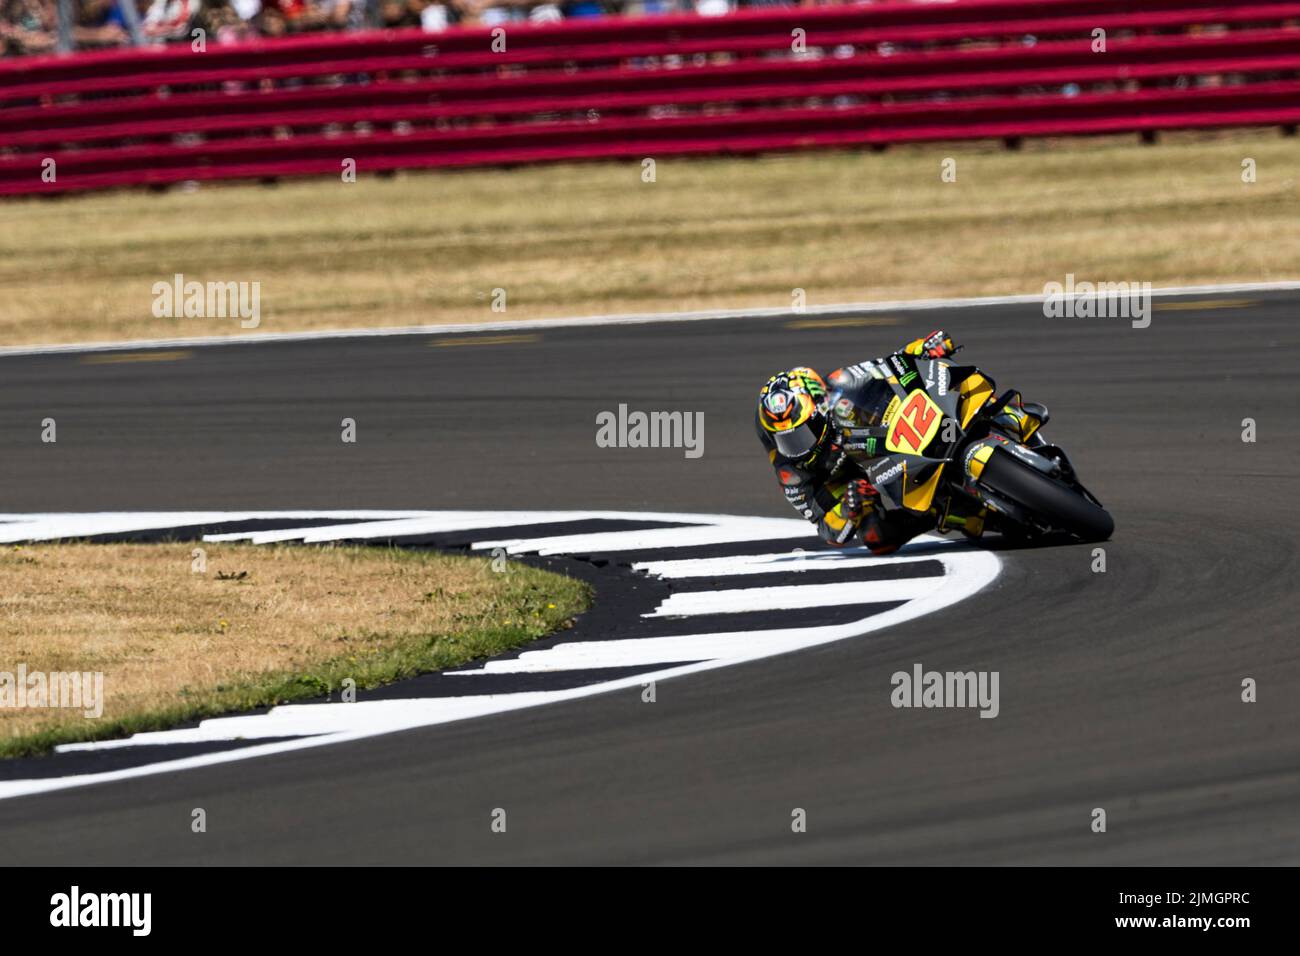 6th August 2022; Silverstone Circuit, Silverstone, Northamptonshire, England: British MotoGP Grand Prix, Qualifying: Number 72 Mooney VR46 Racing bike ridden by Marco Bezzecchi during qualifying at the British MotoGP Stock Photo